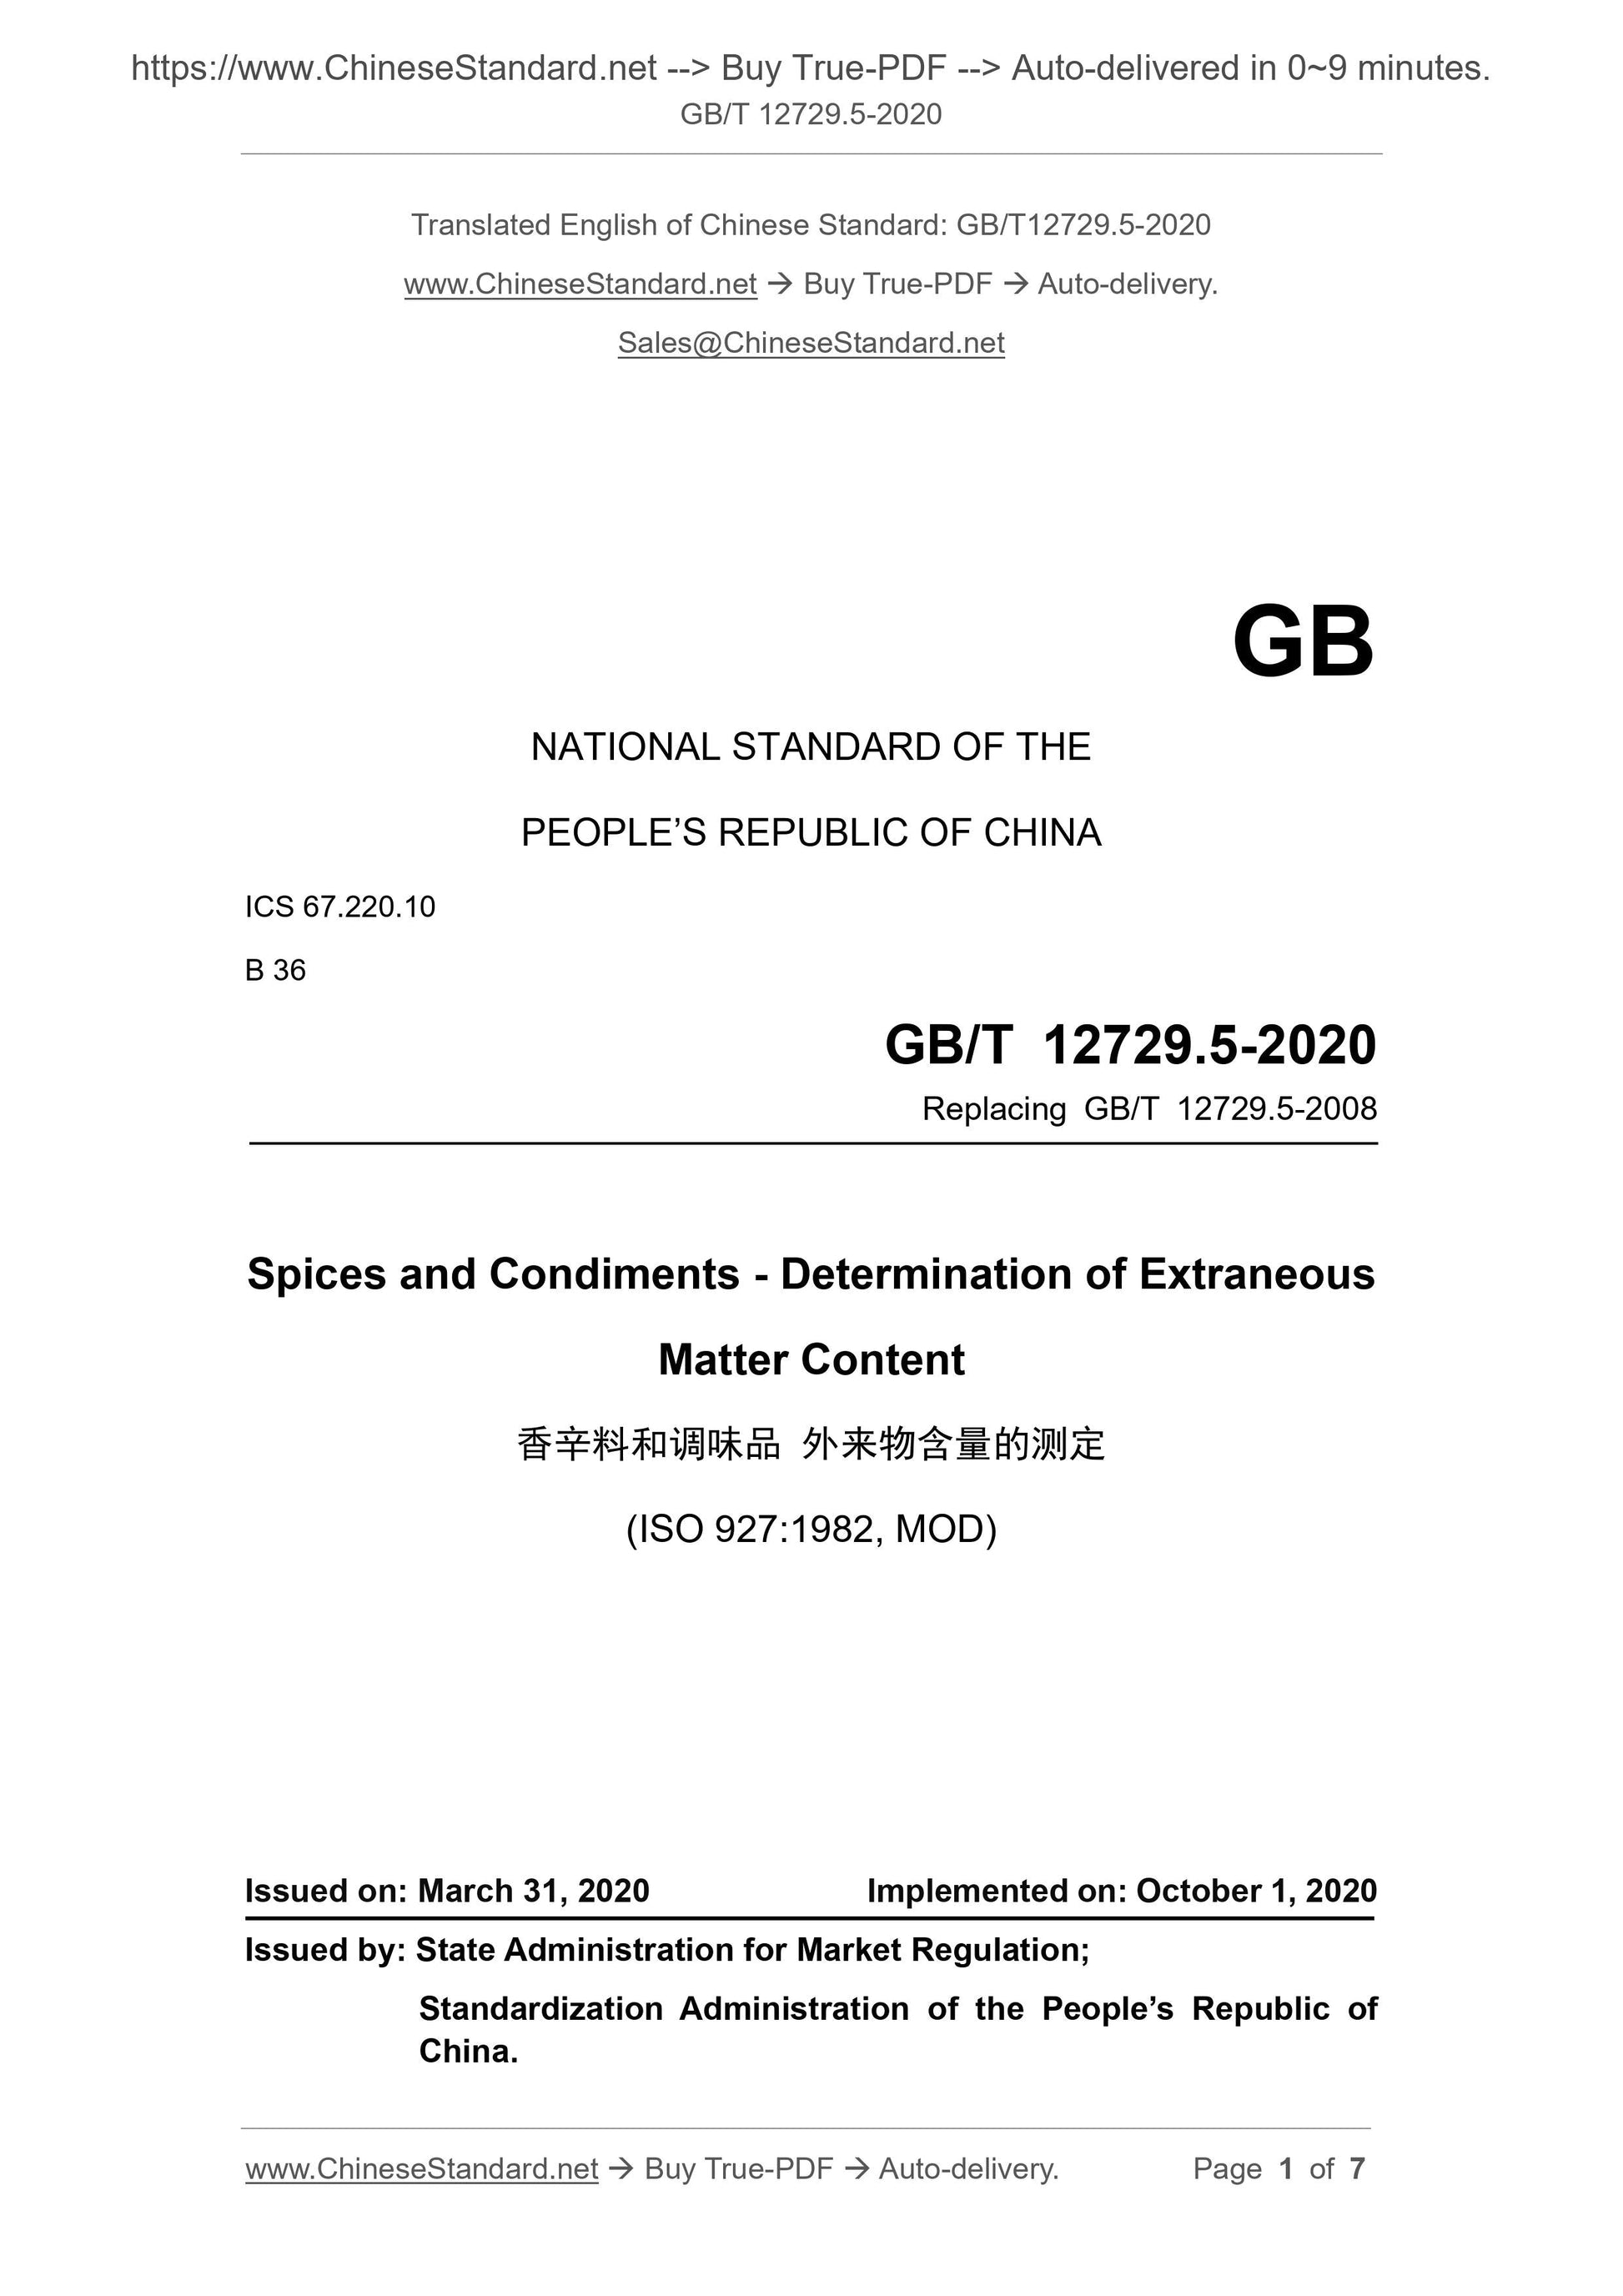 GB/T 12729.5-2020 Page 1